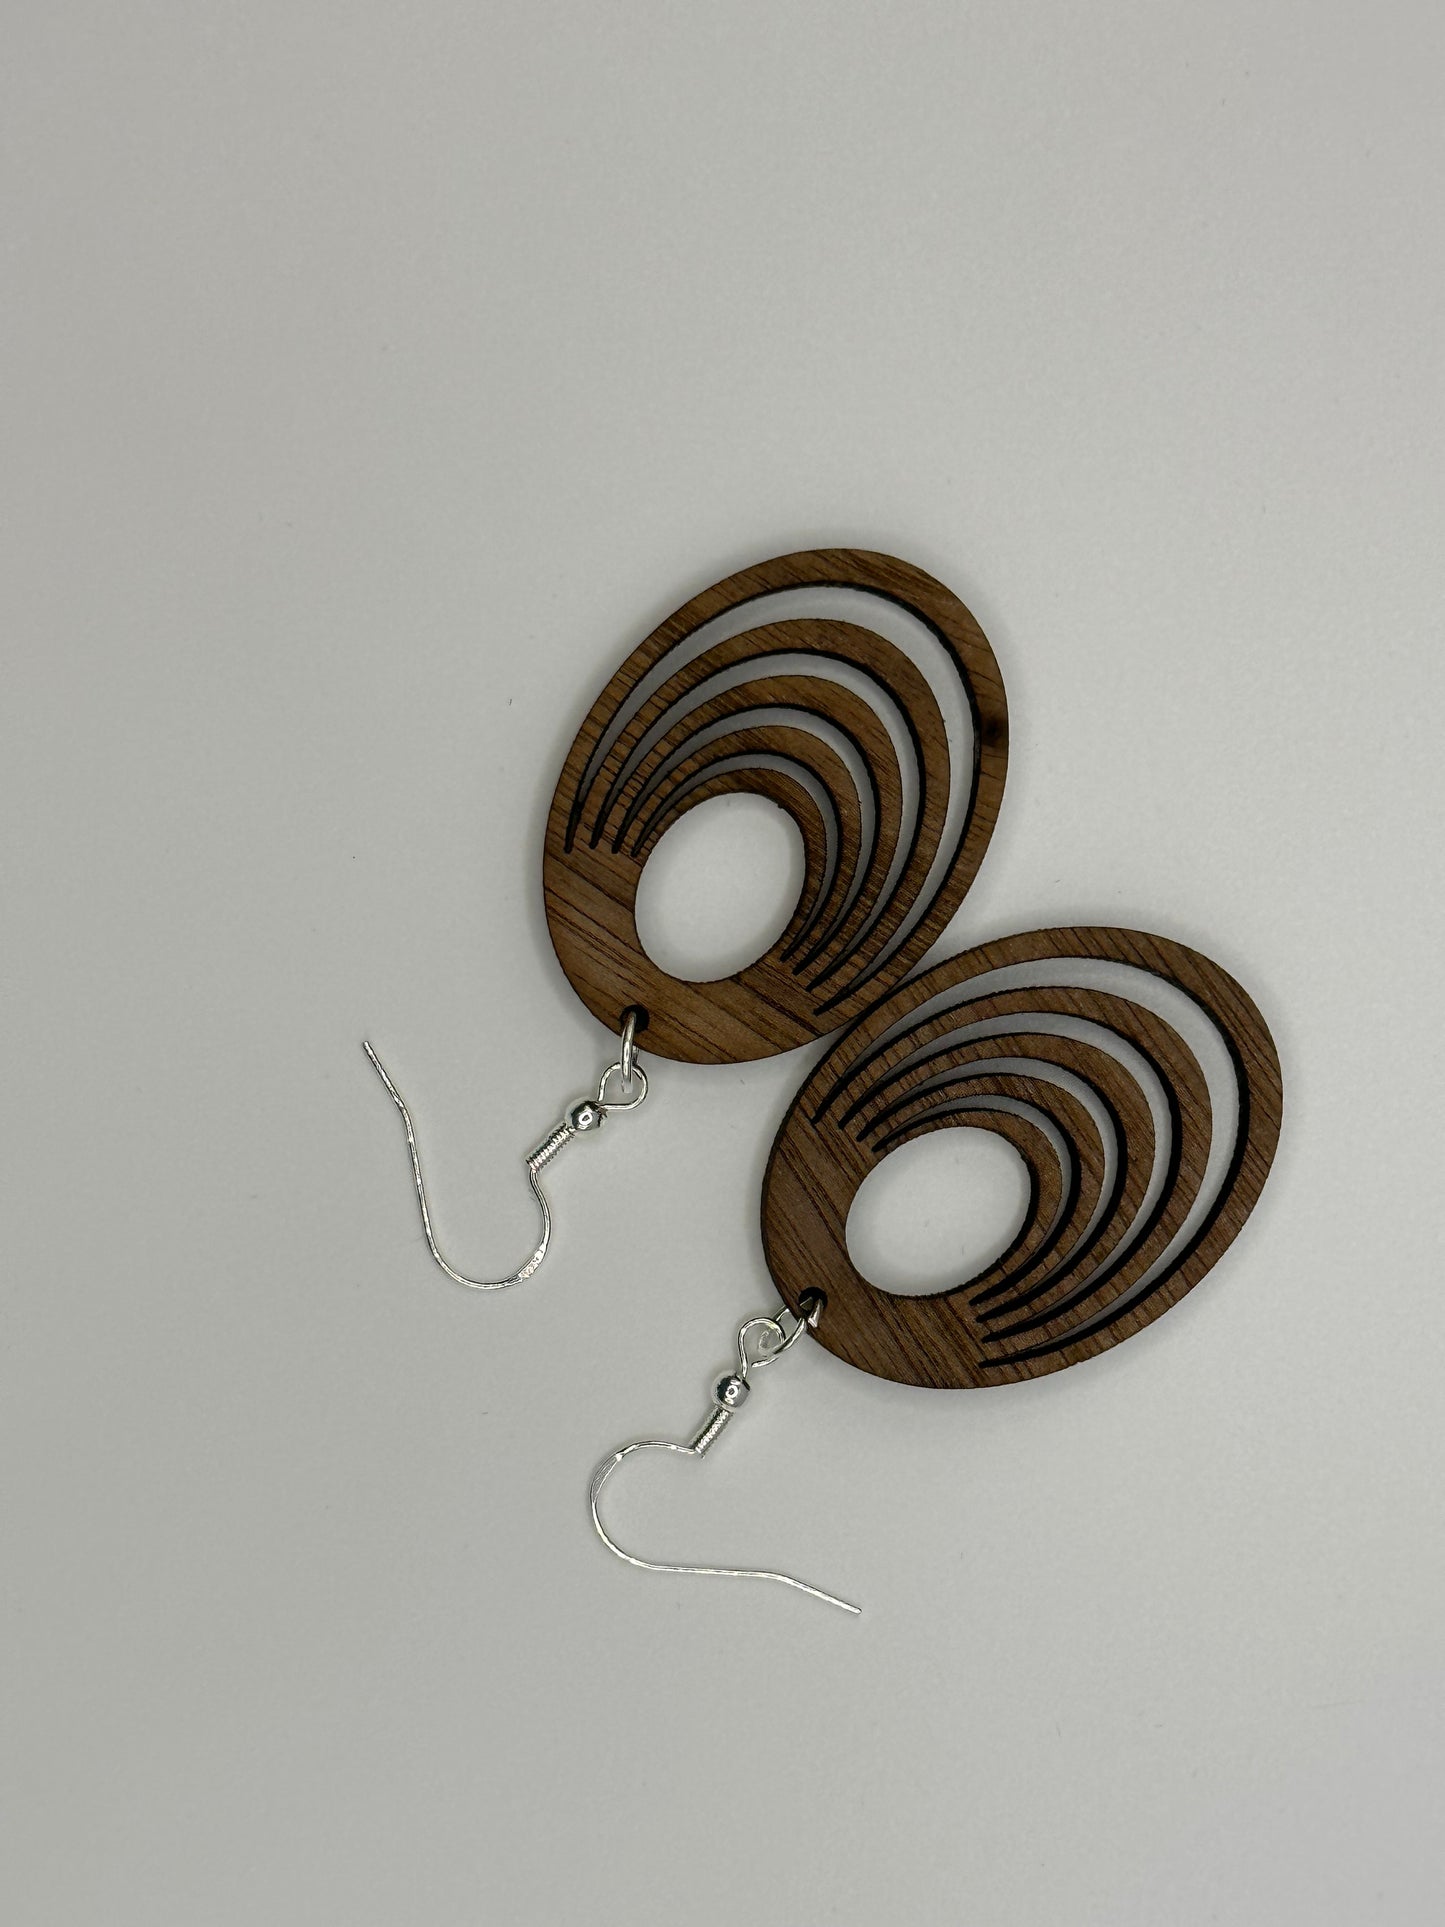 Handmade natural walnutwood earrings with 925 sterling silver French hooks.